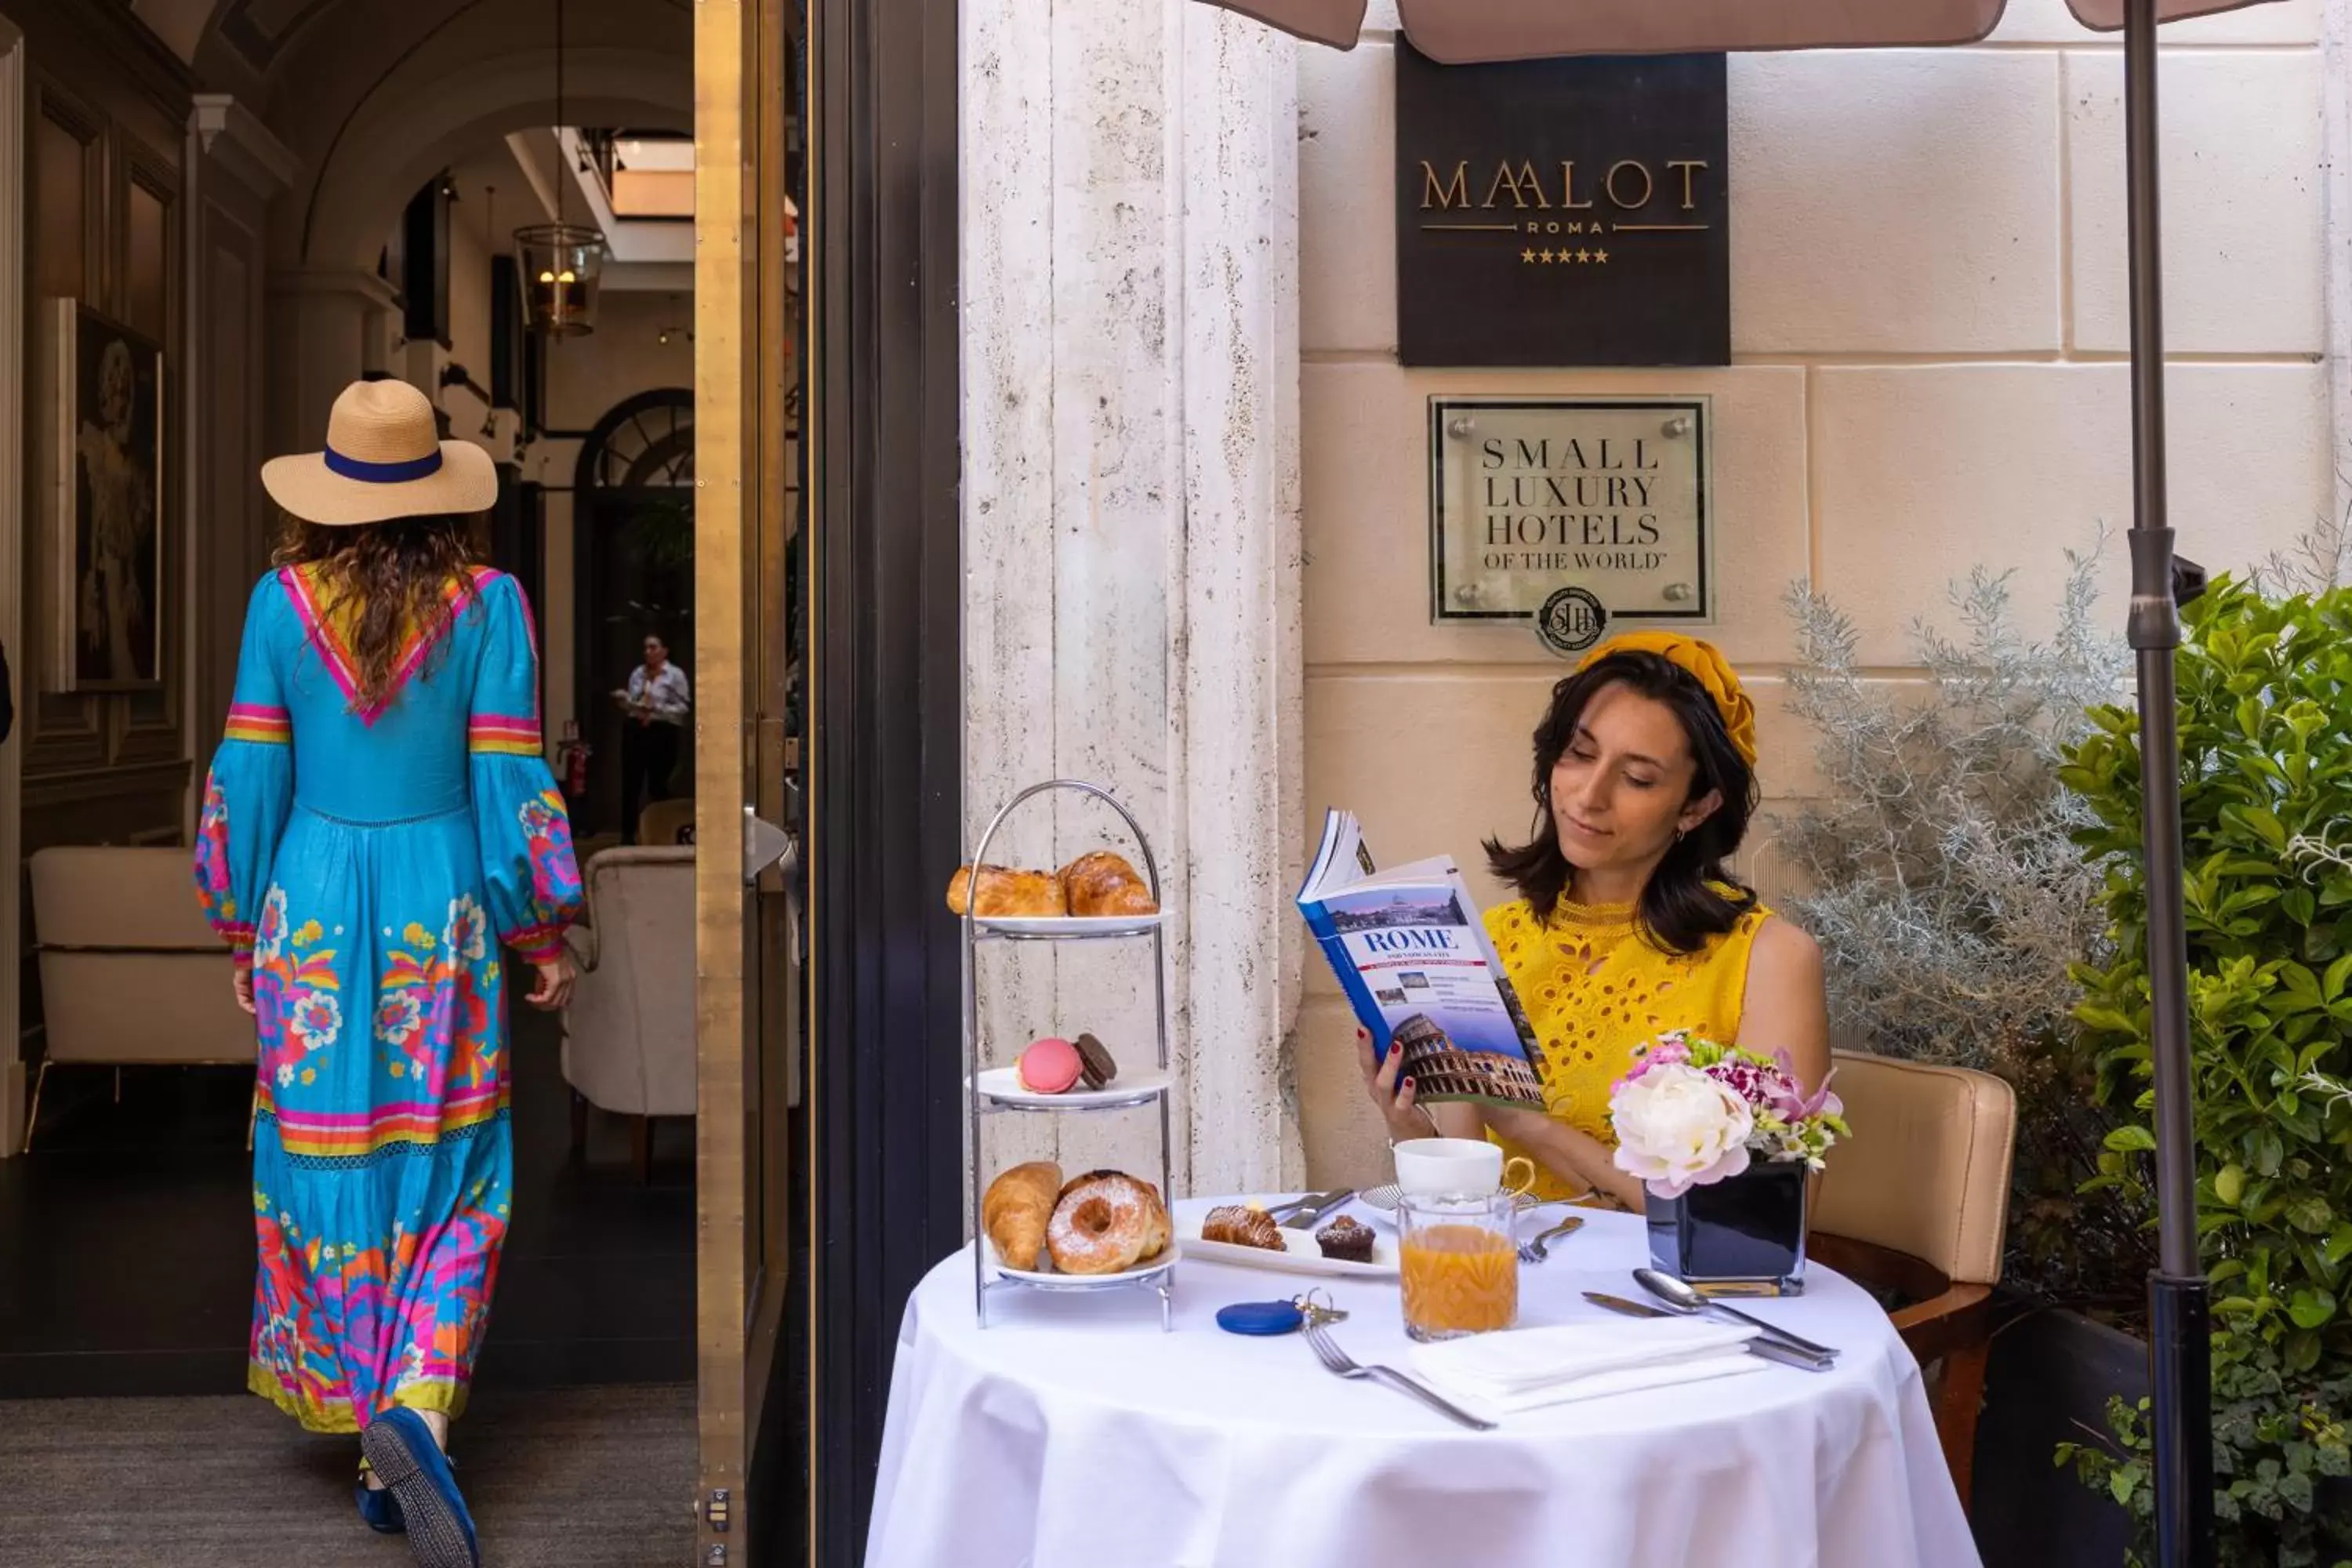 Restaurant/places to eat in Maalot Roma - Small Luxury Hotels of the World